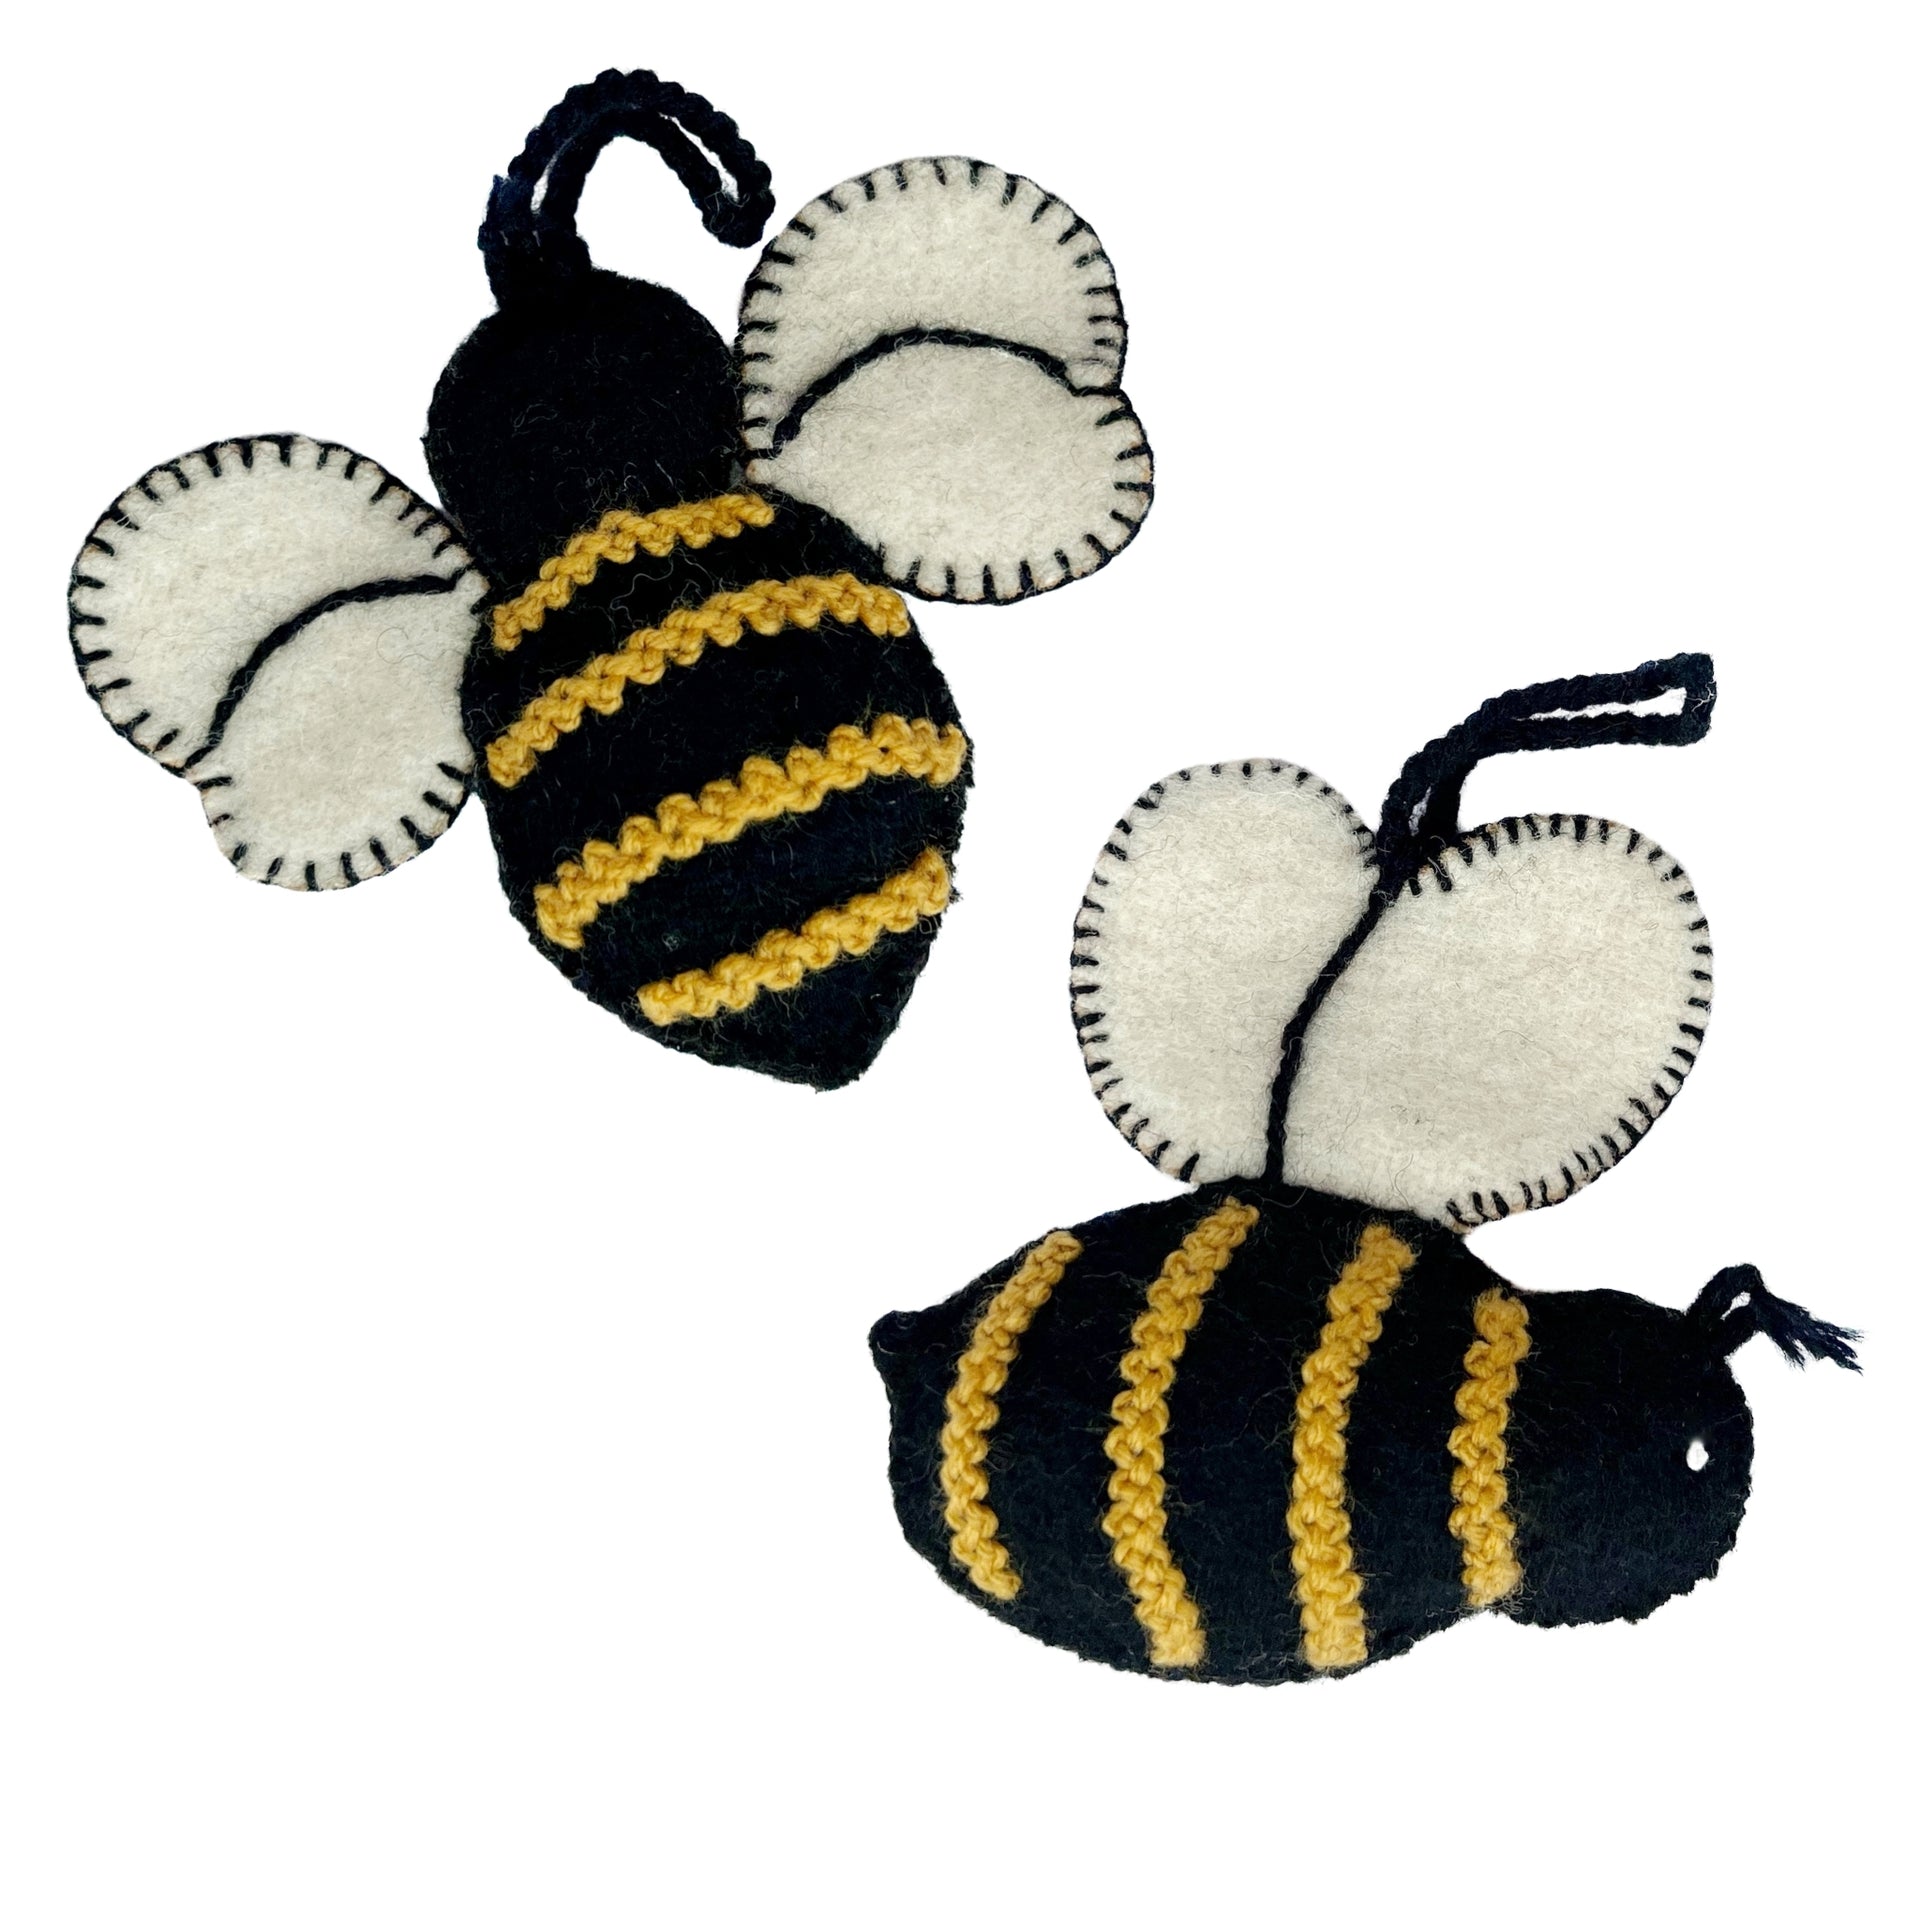 Two styles of handmade embroidered Bee Christmas Ornaments from Peru.